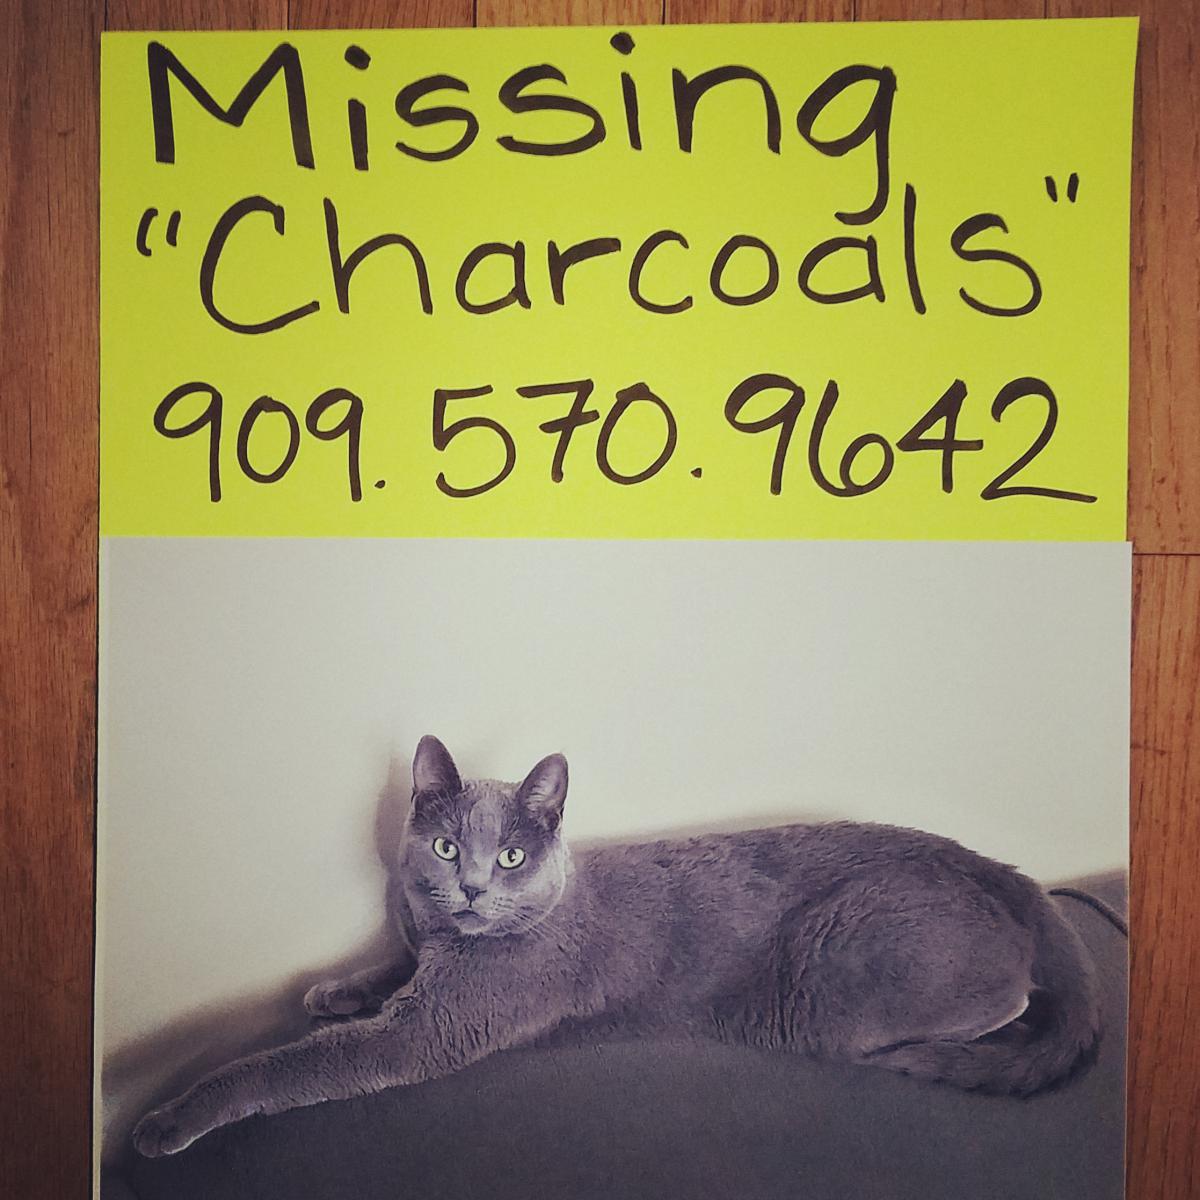 Image of Charcoals, Lost Cat